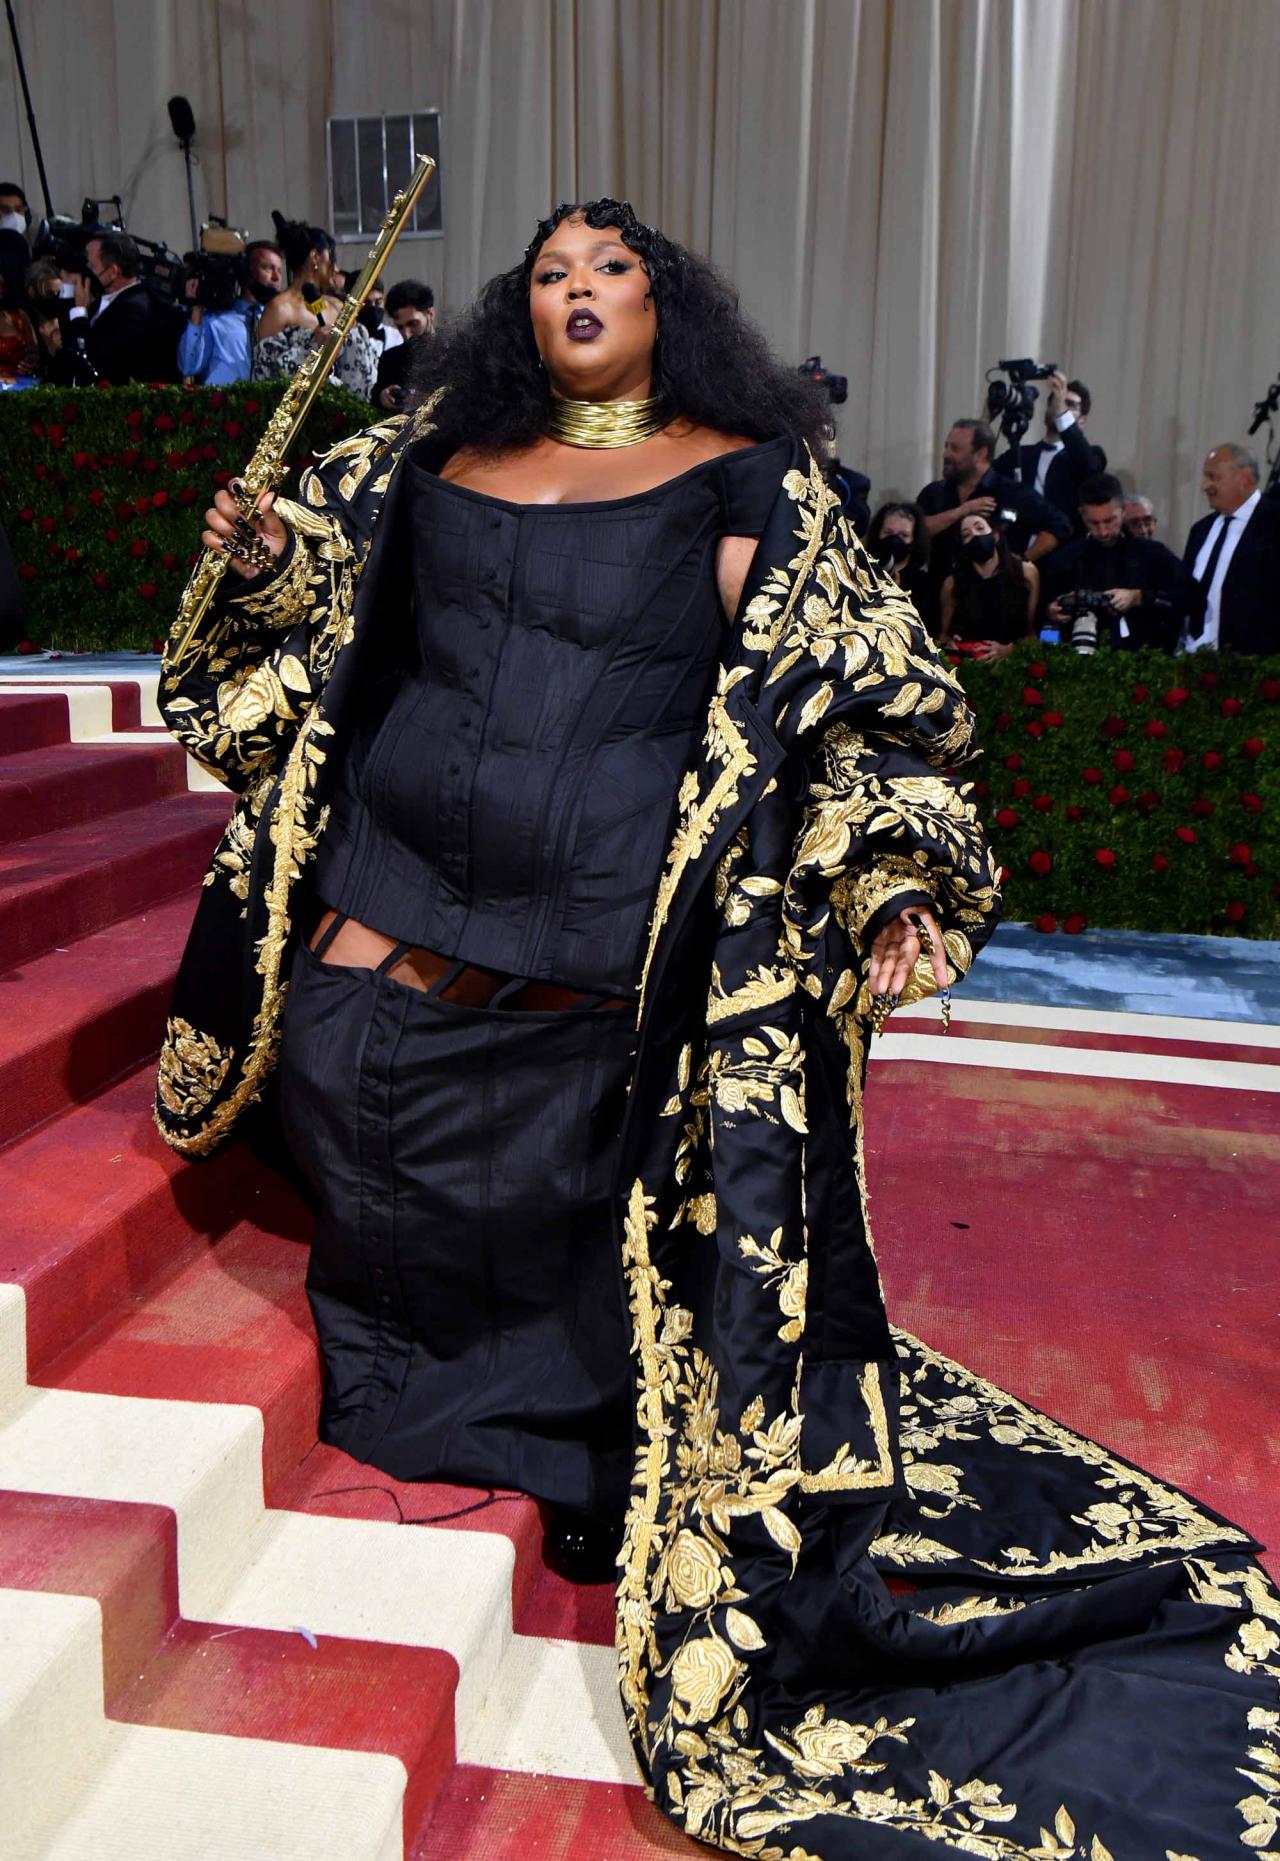 Singer Lizzo arrives for the 2022 Met Gala at the Metropolitan Museum of Art on May 2, 2022, in New York. - The Gala raises money for the Metropolitan Museum of Art's Costume Institute. The Gala's 2022 theme is "In America: An Anthology of Fashion". (Photo by ANGELA  WEISS / AFP)